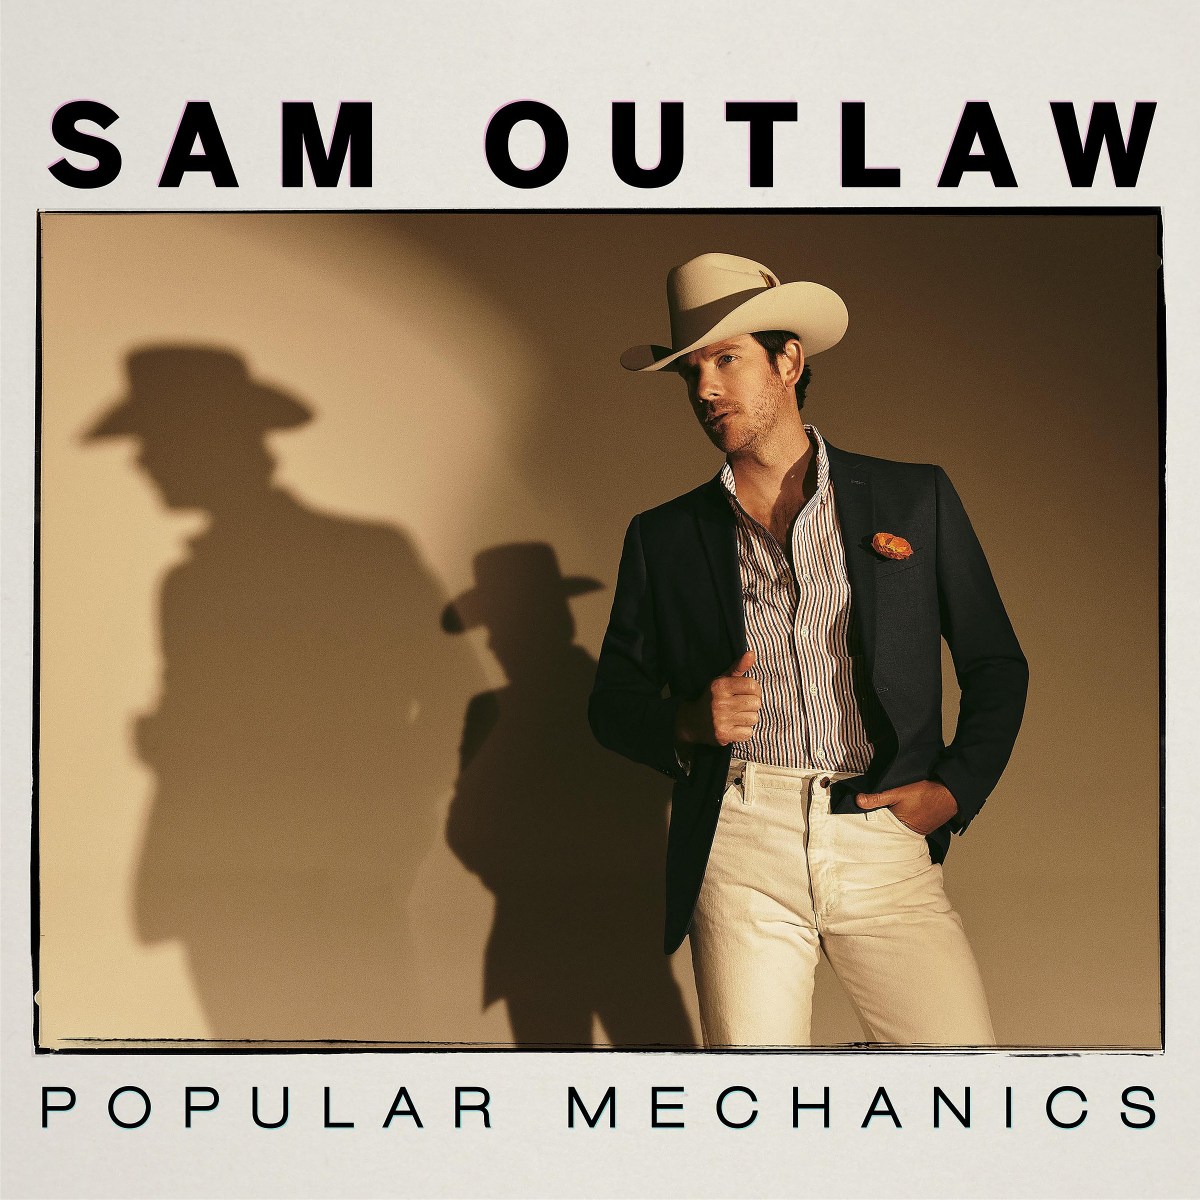 Sam Outlaw (Popular Mechanics) Album Cover POSTER - Lost Posters